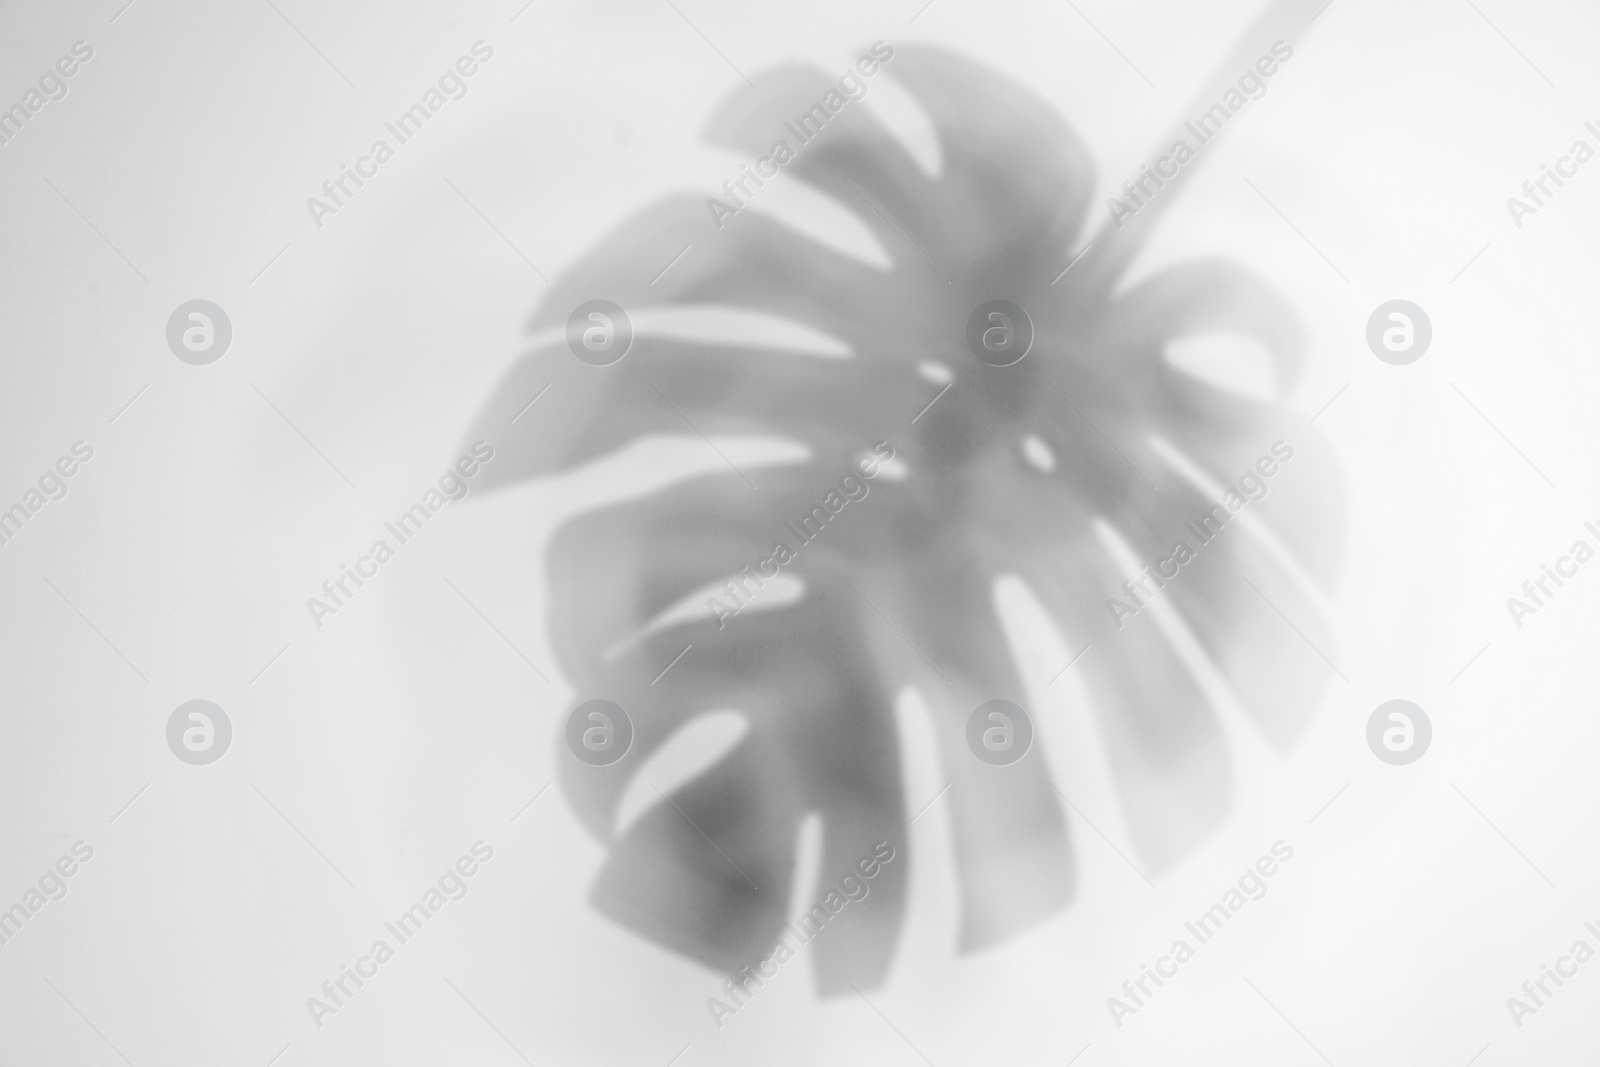 Photo of Shadow of monstera plant leaf on light background